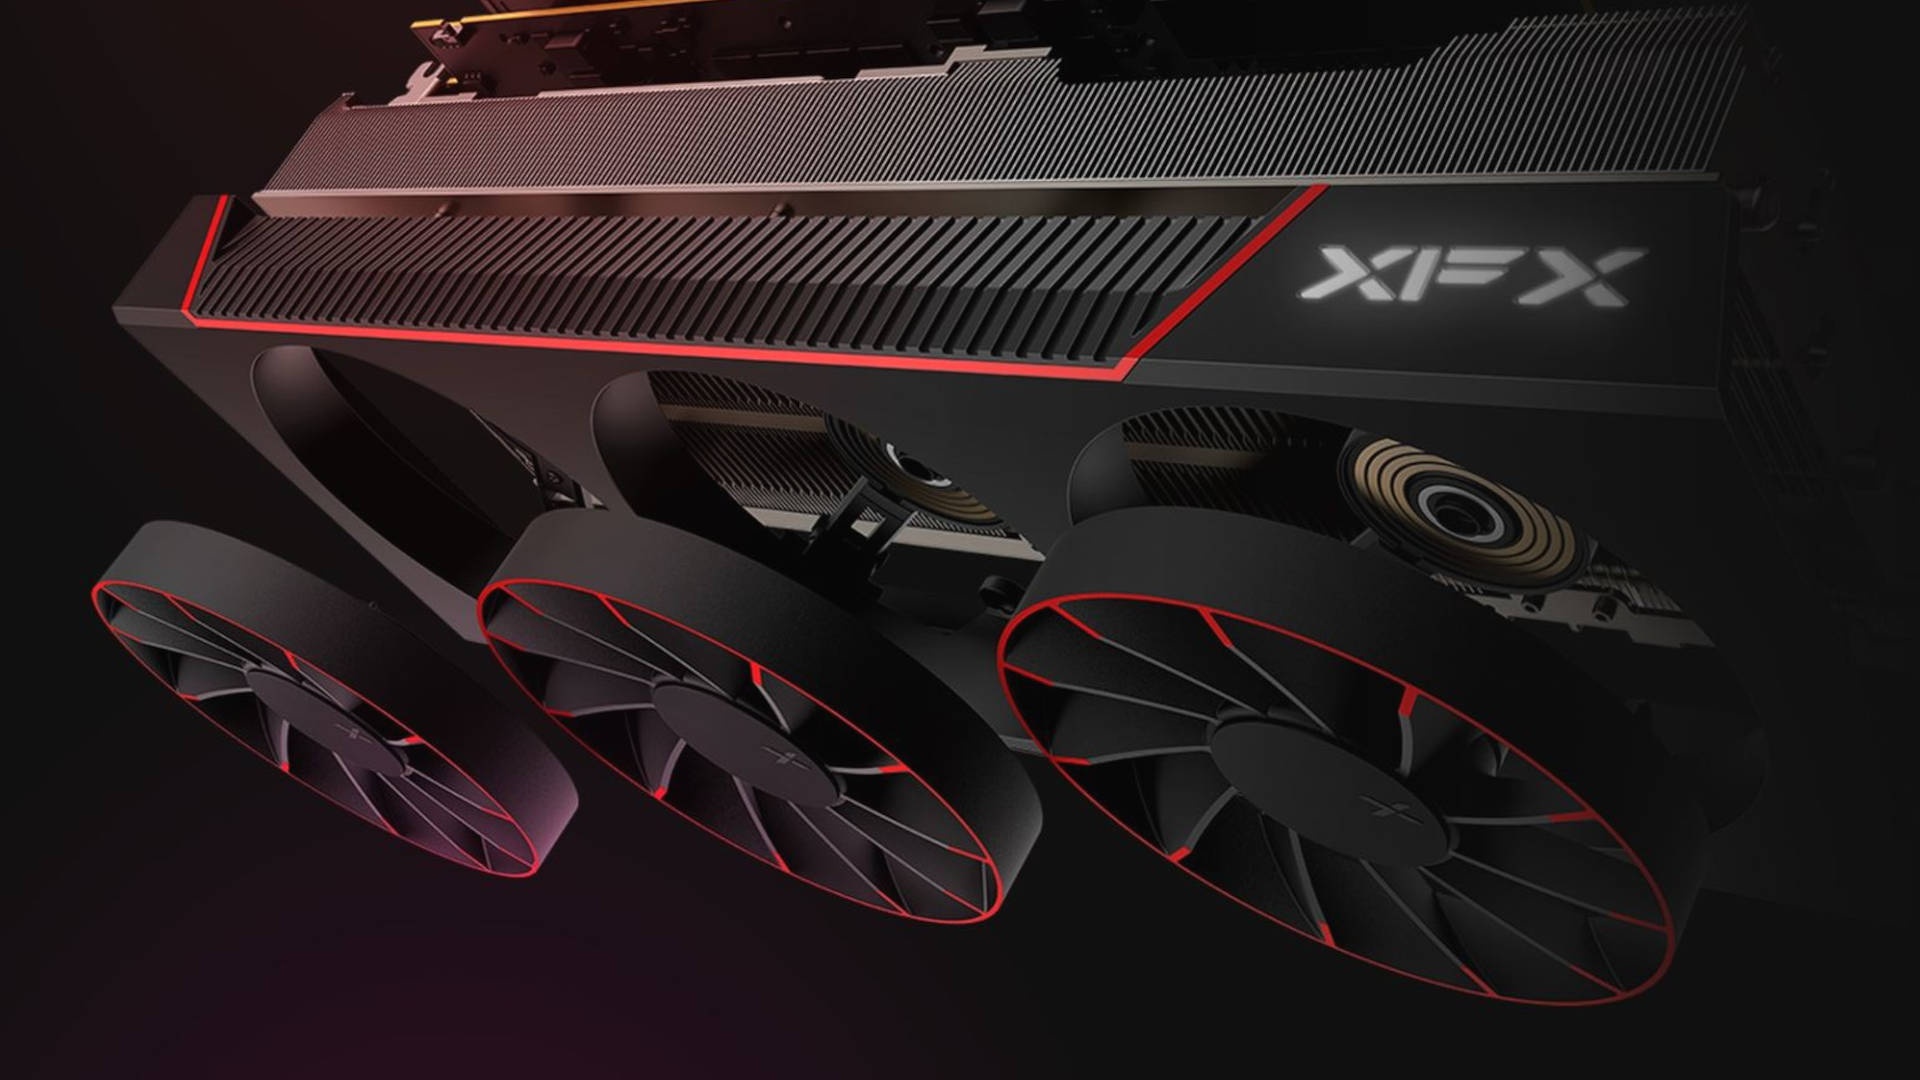  XFX's new Magnetic Air graphics cards let you hot-swap fans, solving the plague of fan hub axle separation 